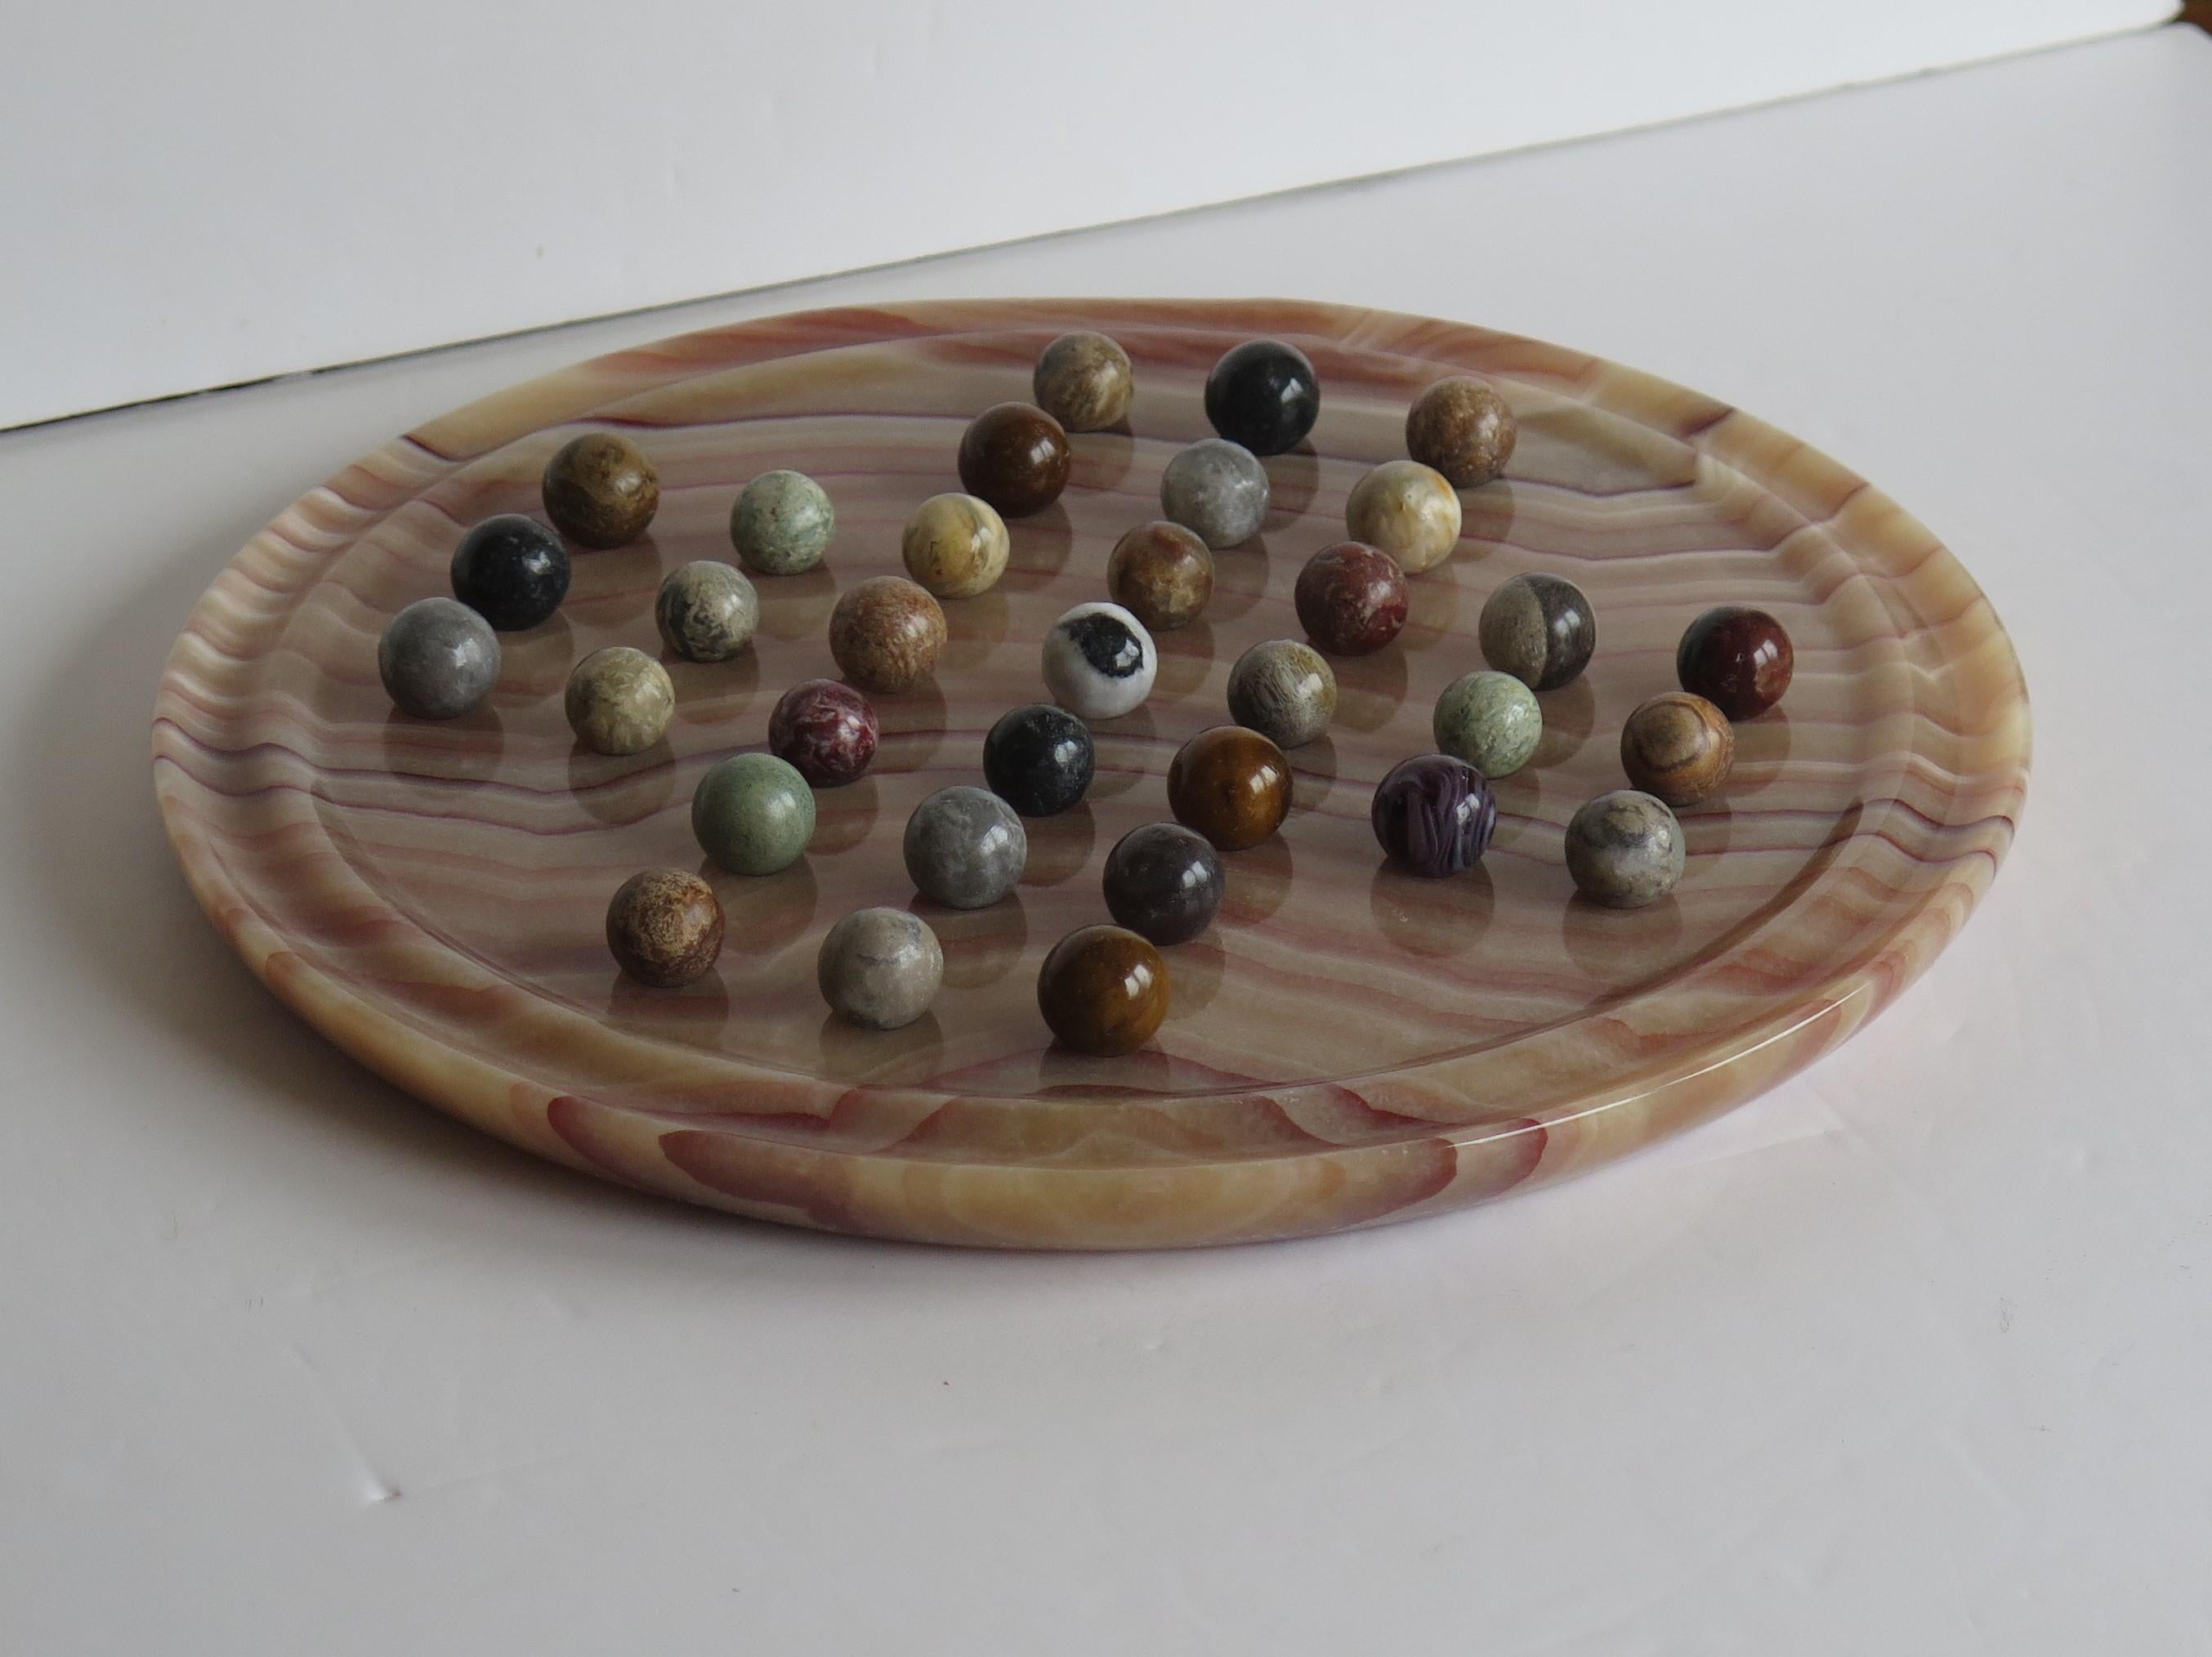 Folk Art Marble Solitaire Board Game Natural Stone Board & 33 Agate Marbles, circa 1950